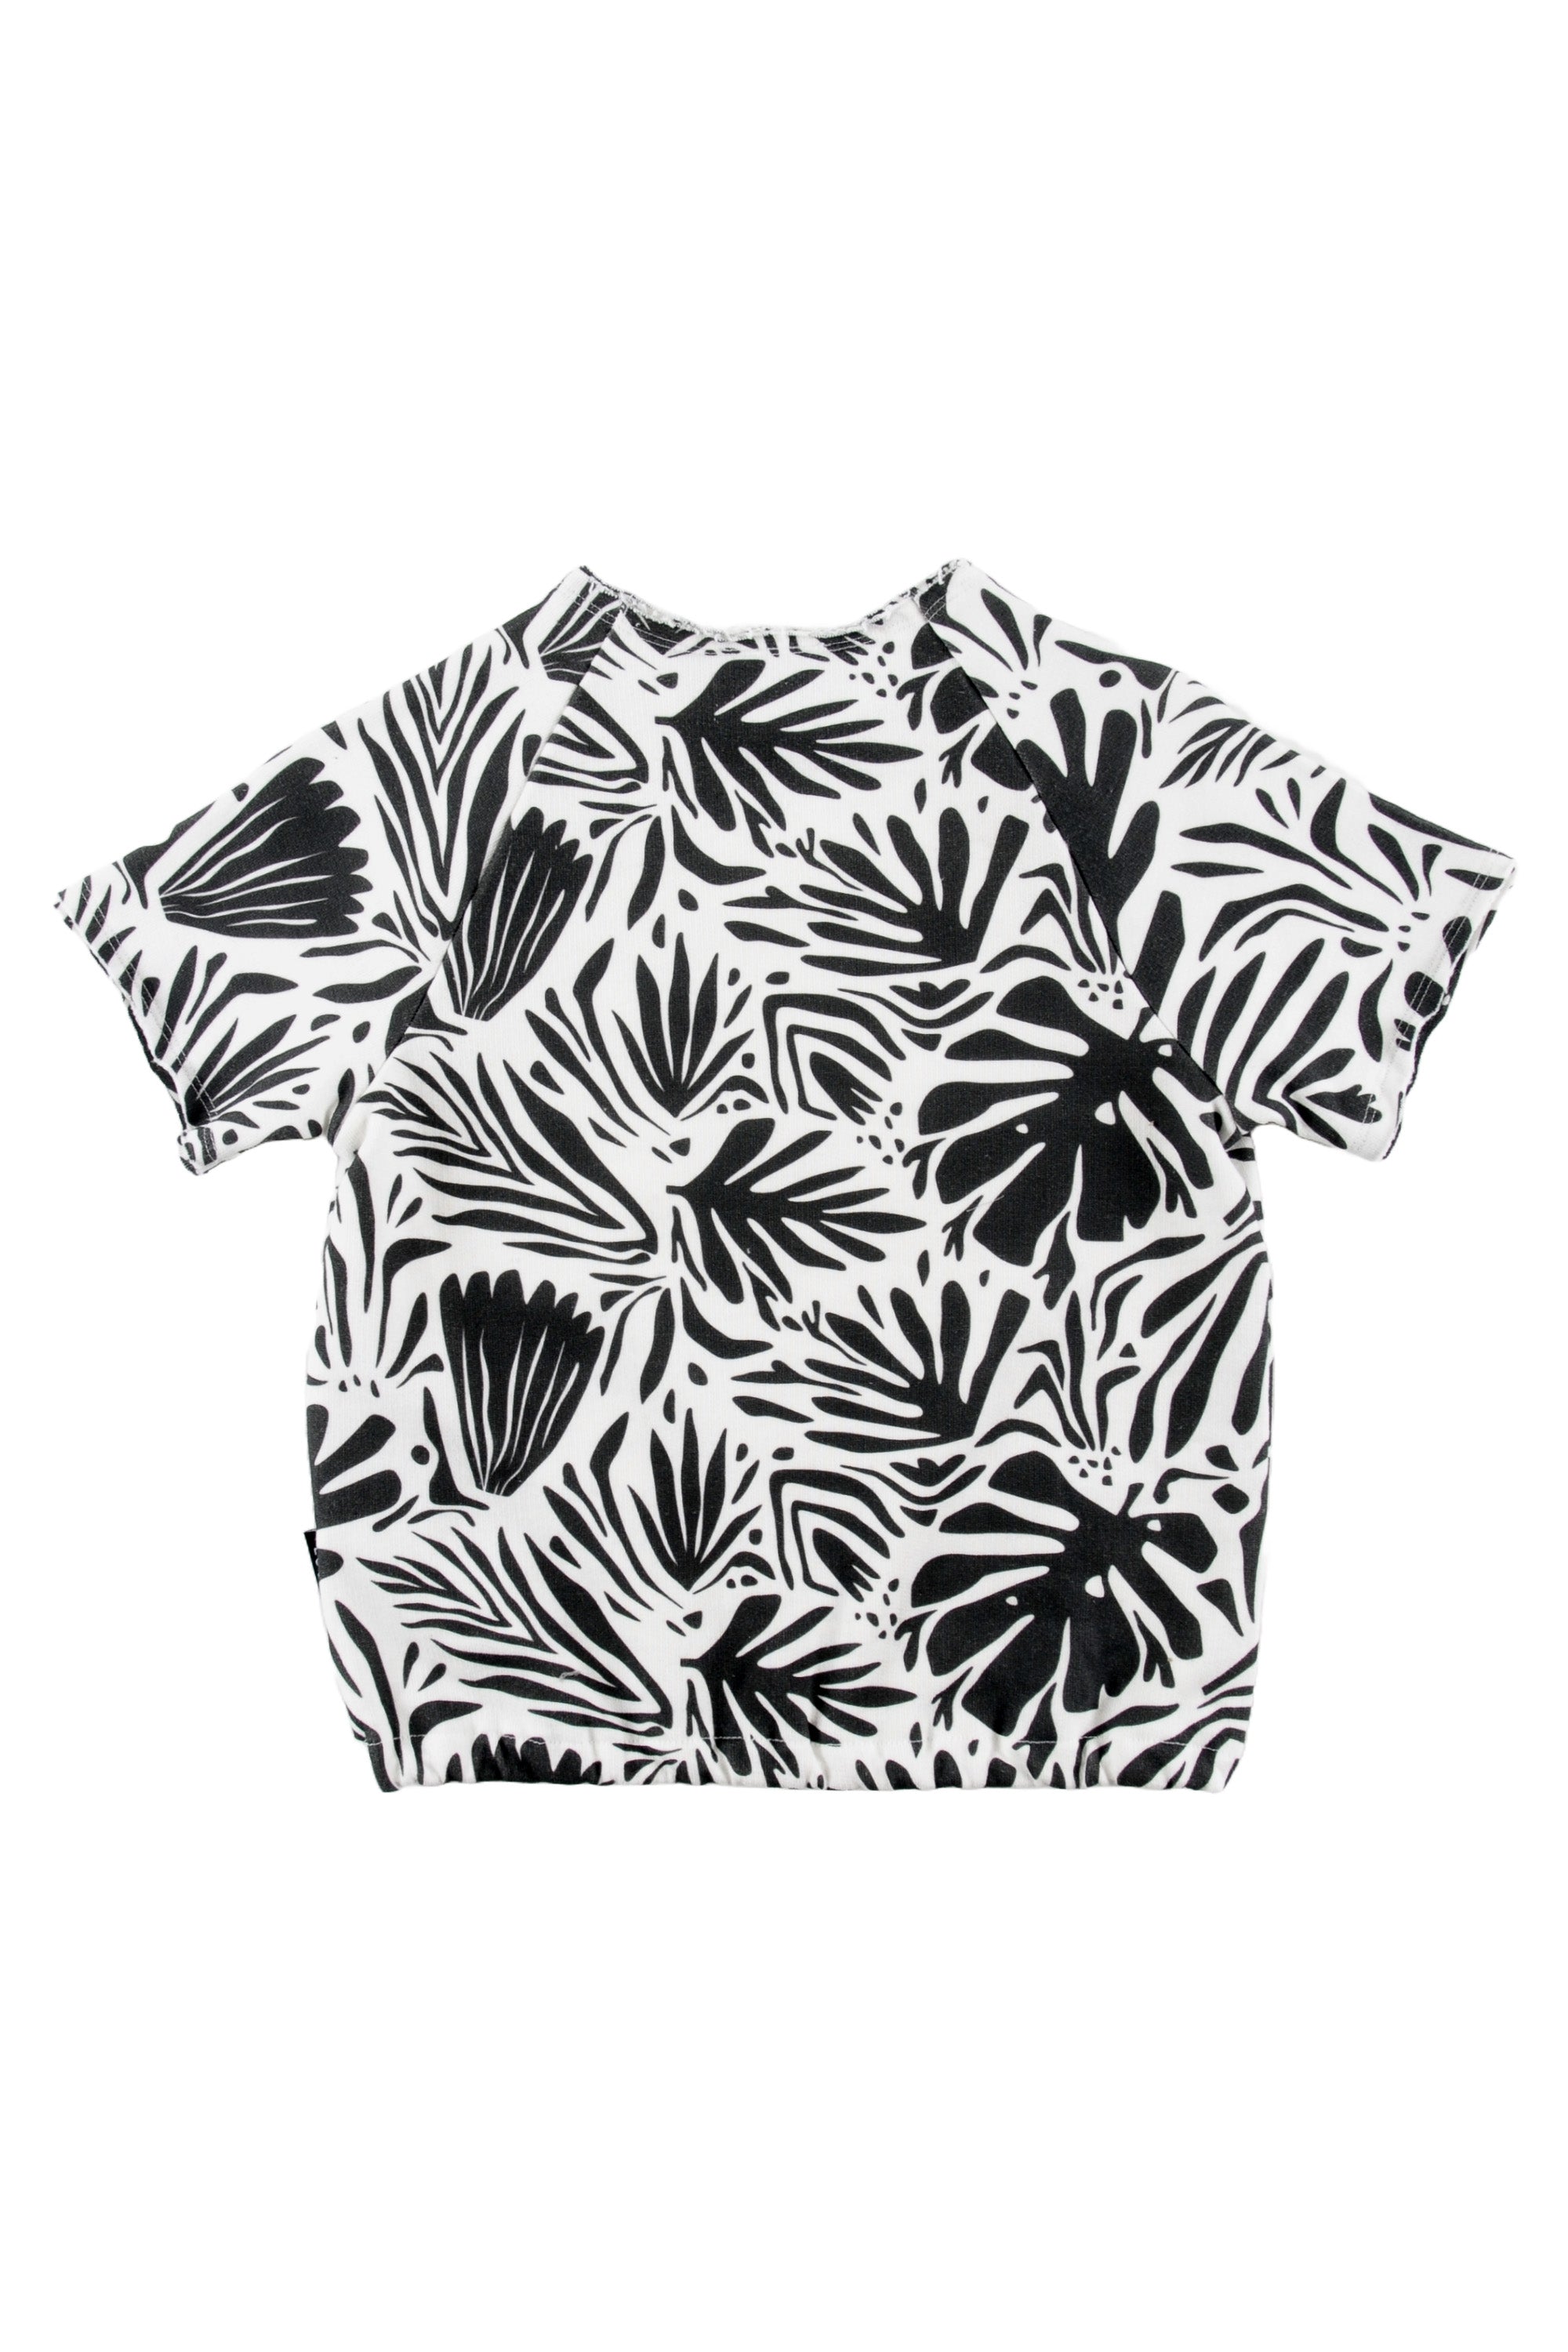 LOUD APPAREL FLORAL ABSTRACT TOP